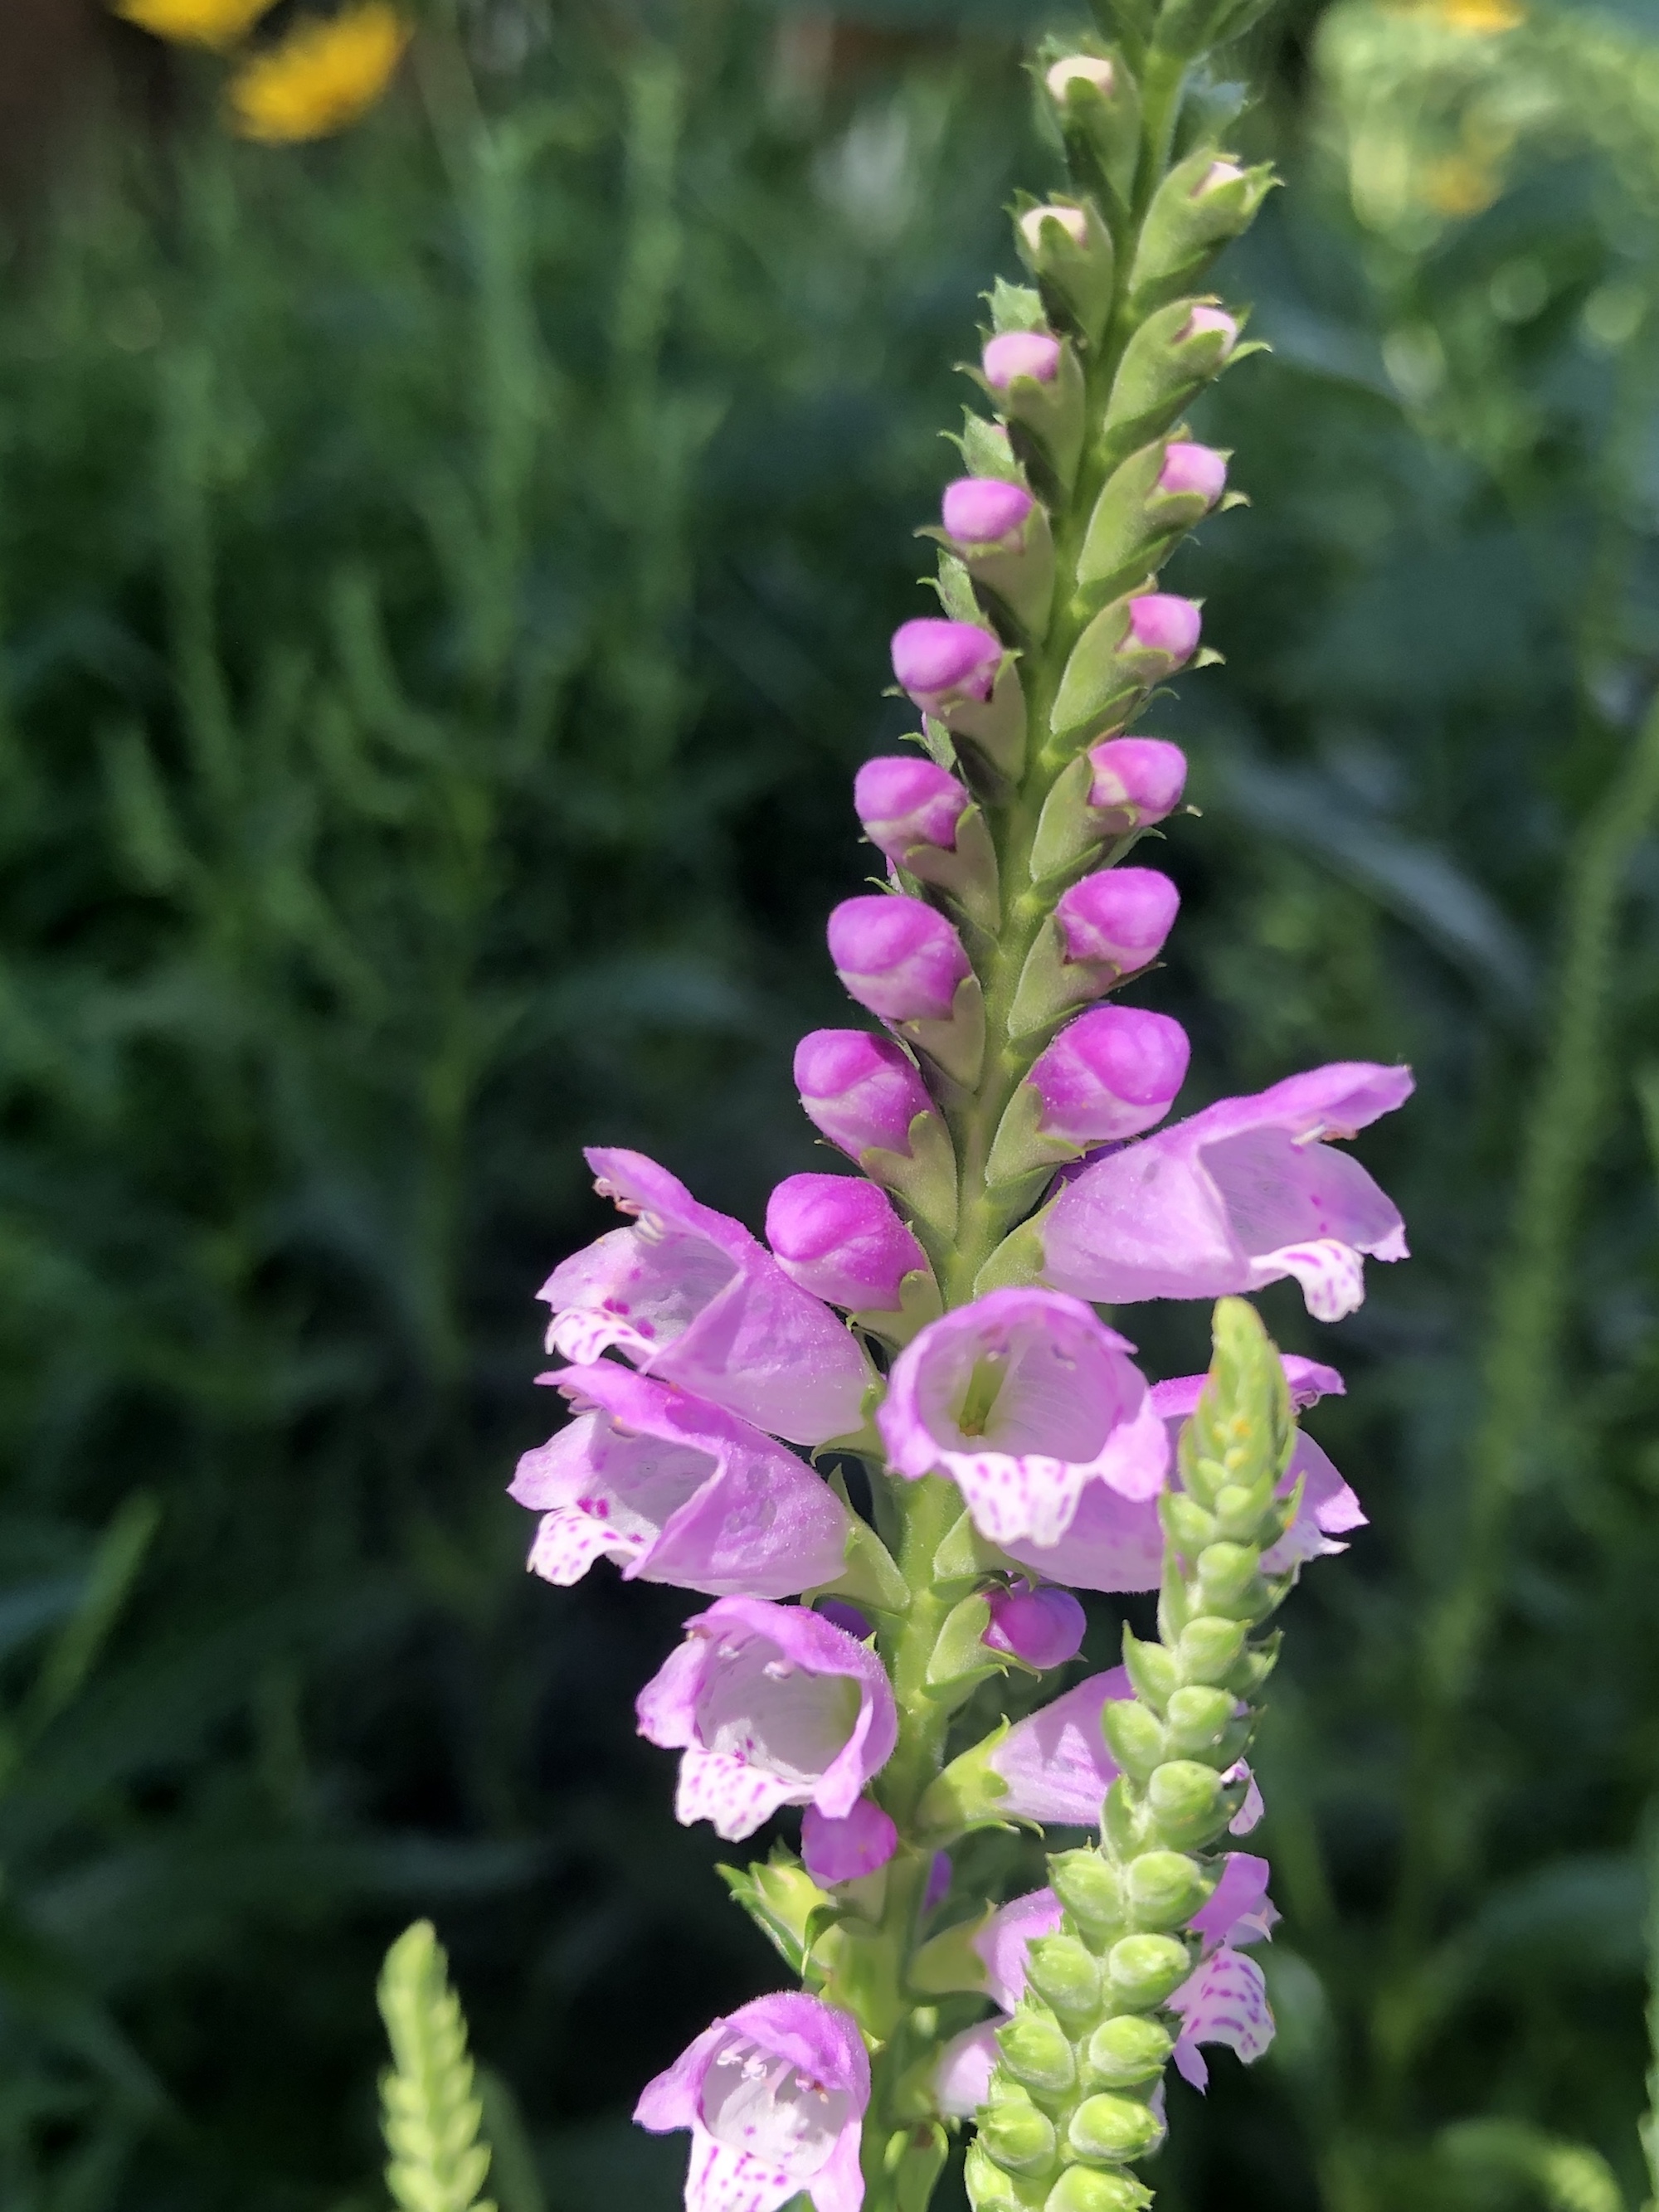 Obedient Plant in Thoreau Rain Garden in Madison, Wisconsin on July 24, 2020.